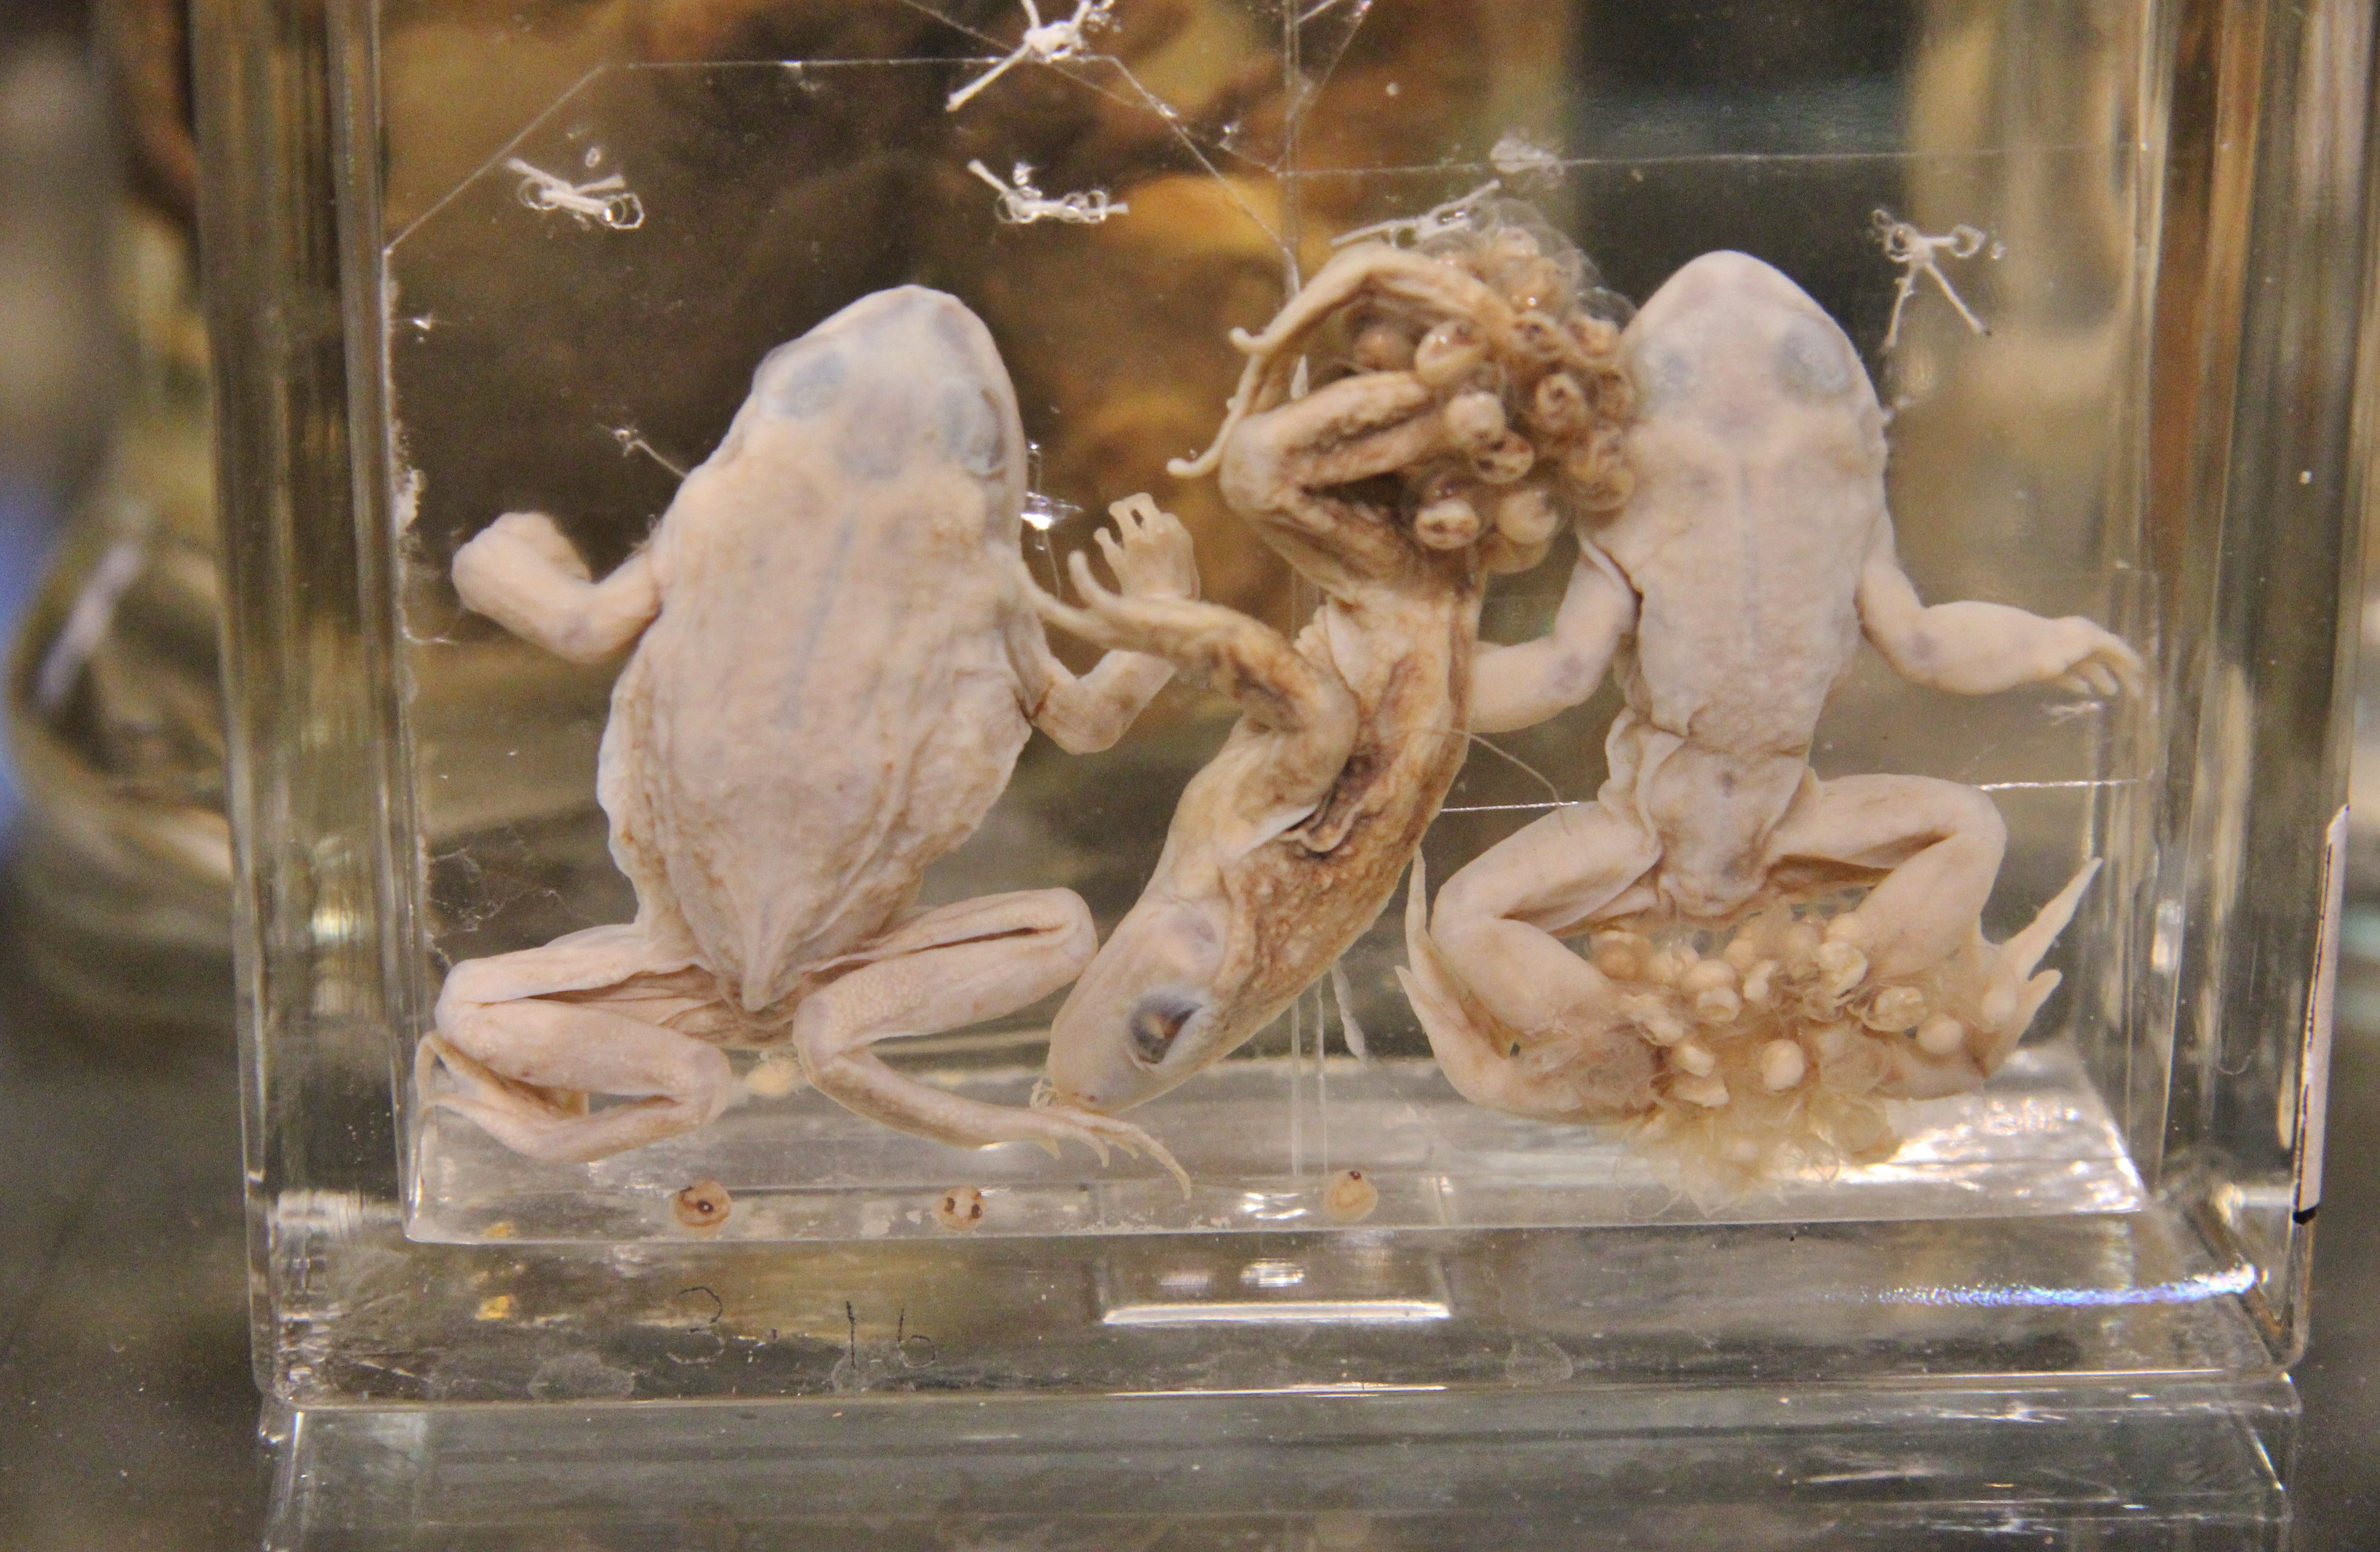 Midwife Toad, Grant Museum of Zoology